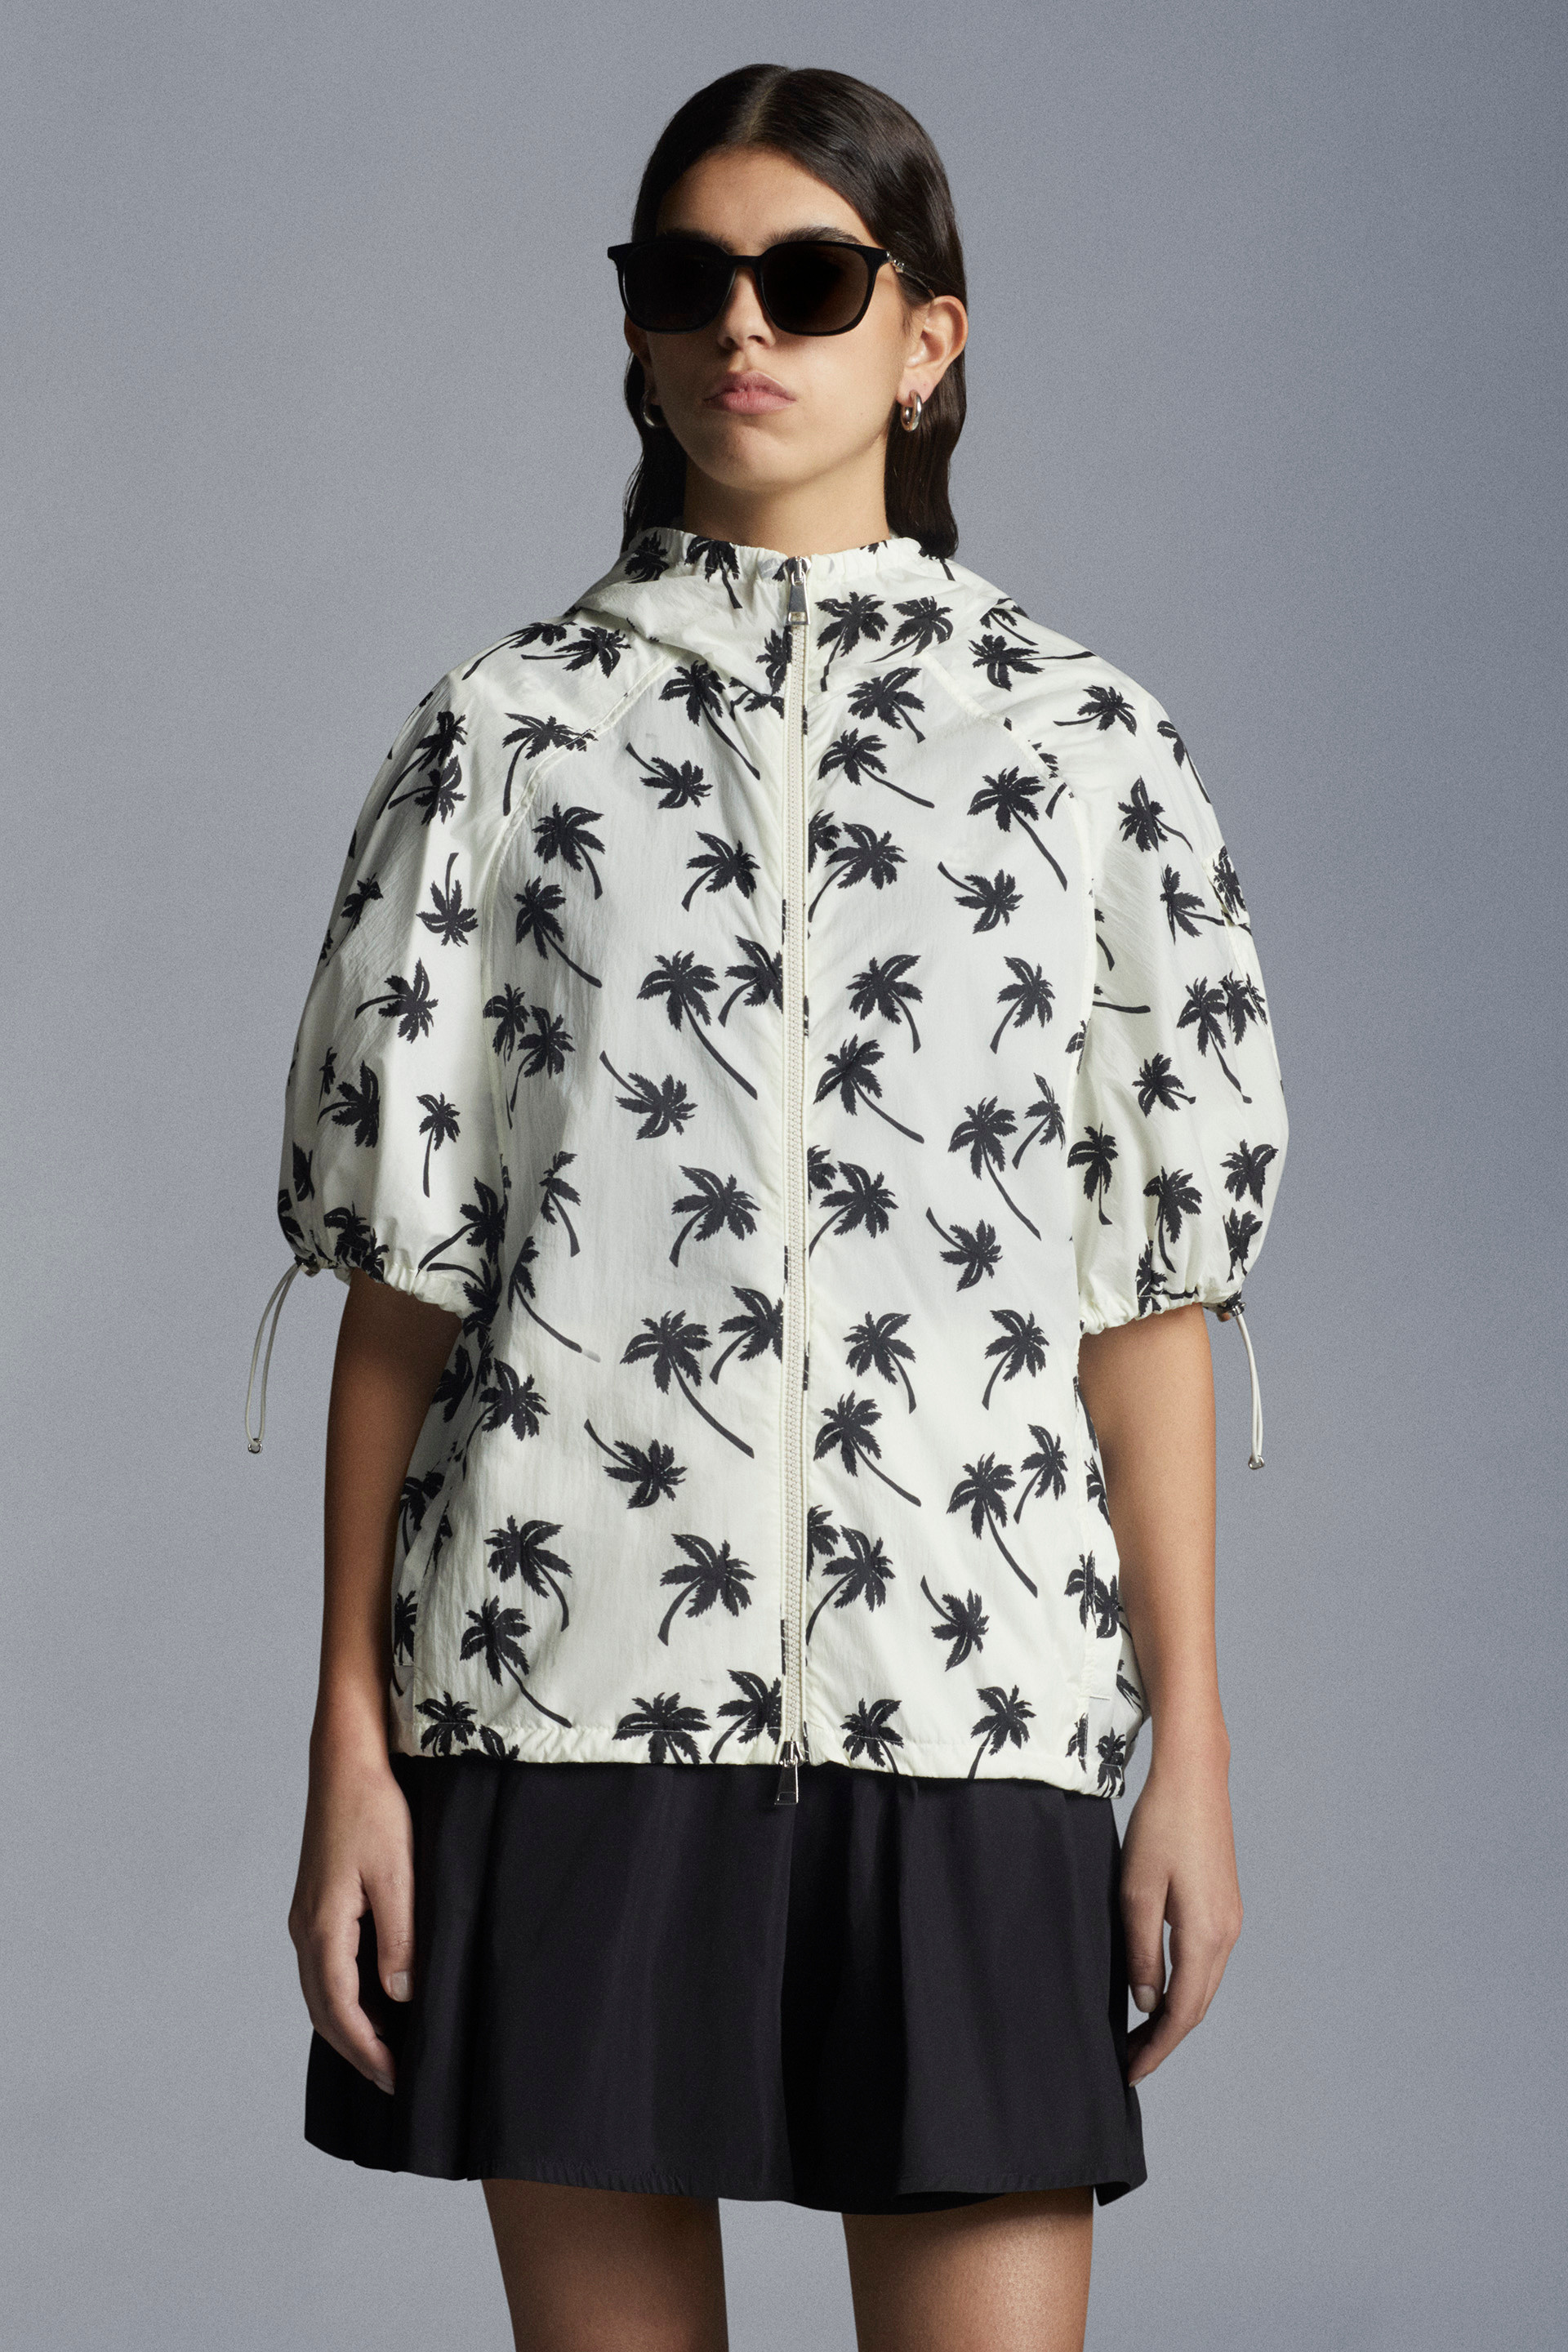 Tops & T-Shirts for Women - Ready-To-Wear | Moncler JP